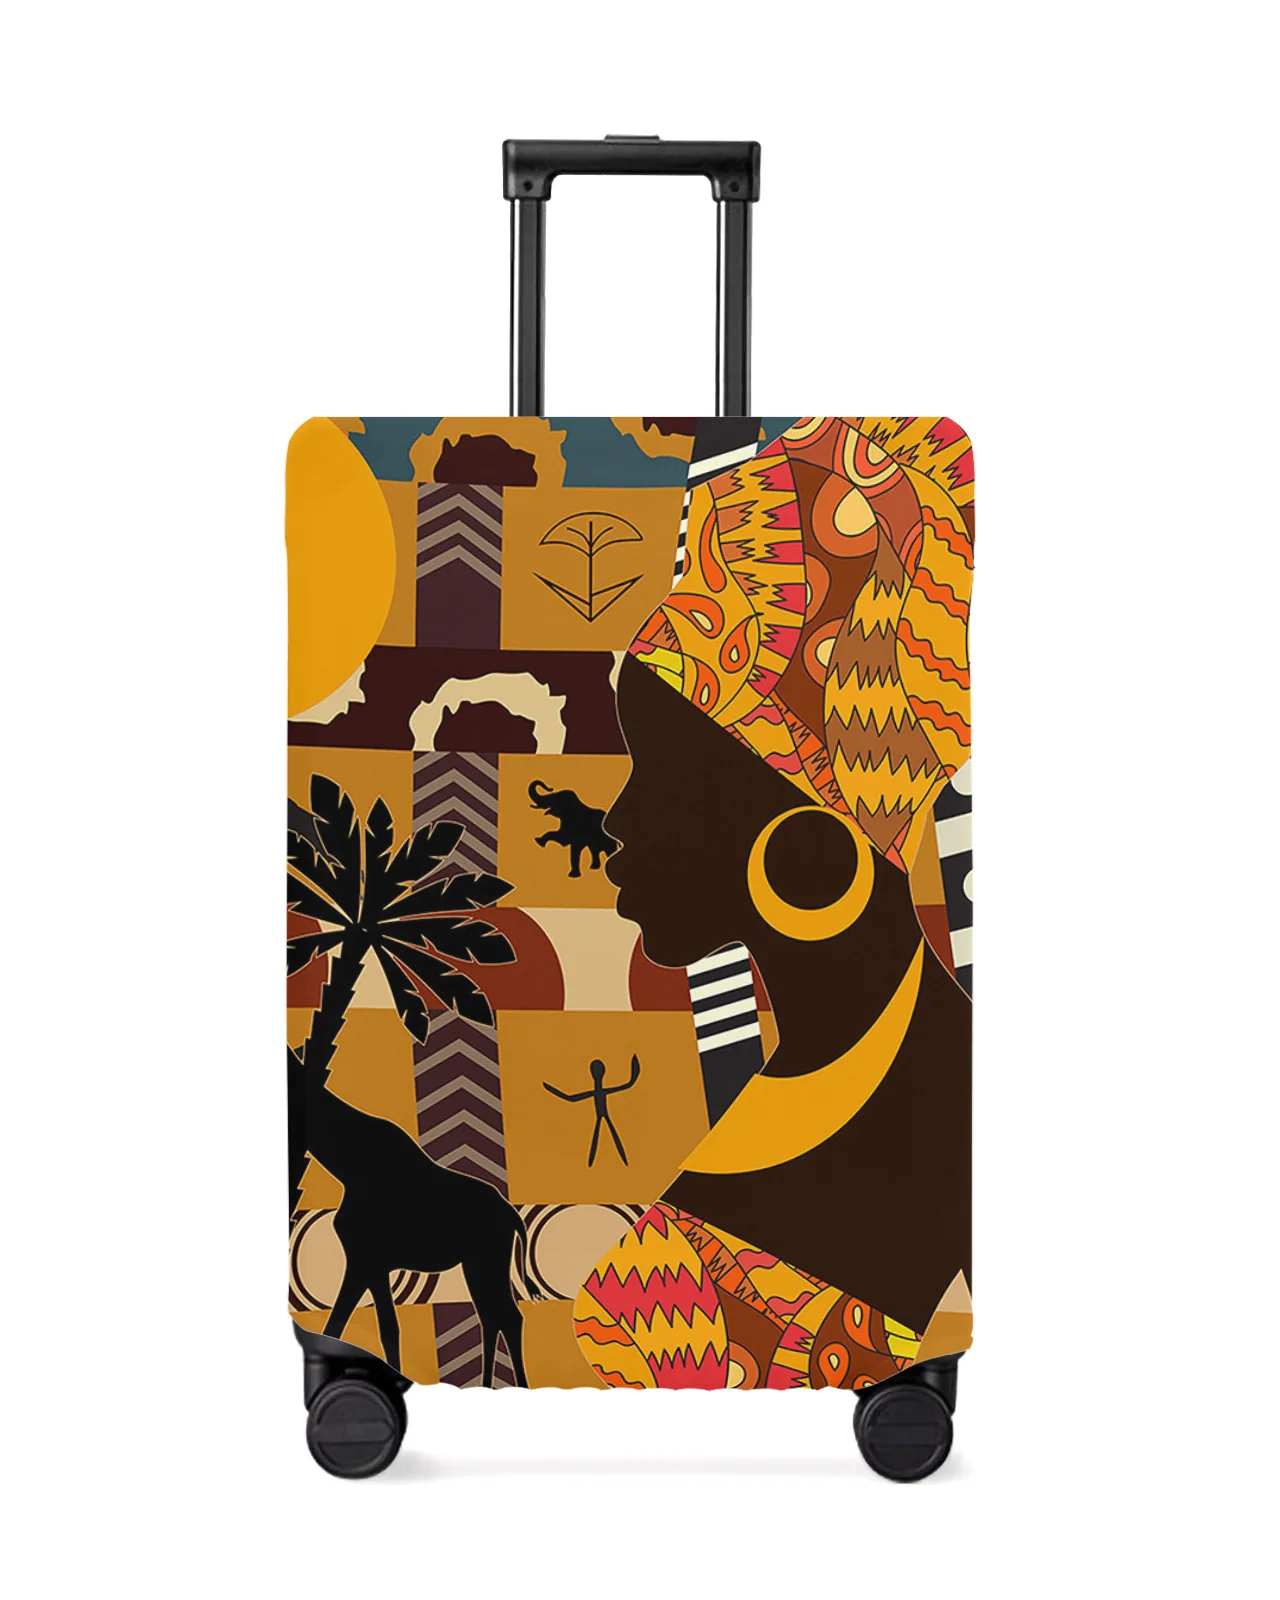 african-woman-female-elephant-giraffe-luggage-protective-cover-travel-accessories-suitcase-elastic-dust-case-protect-sleeve